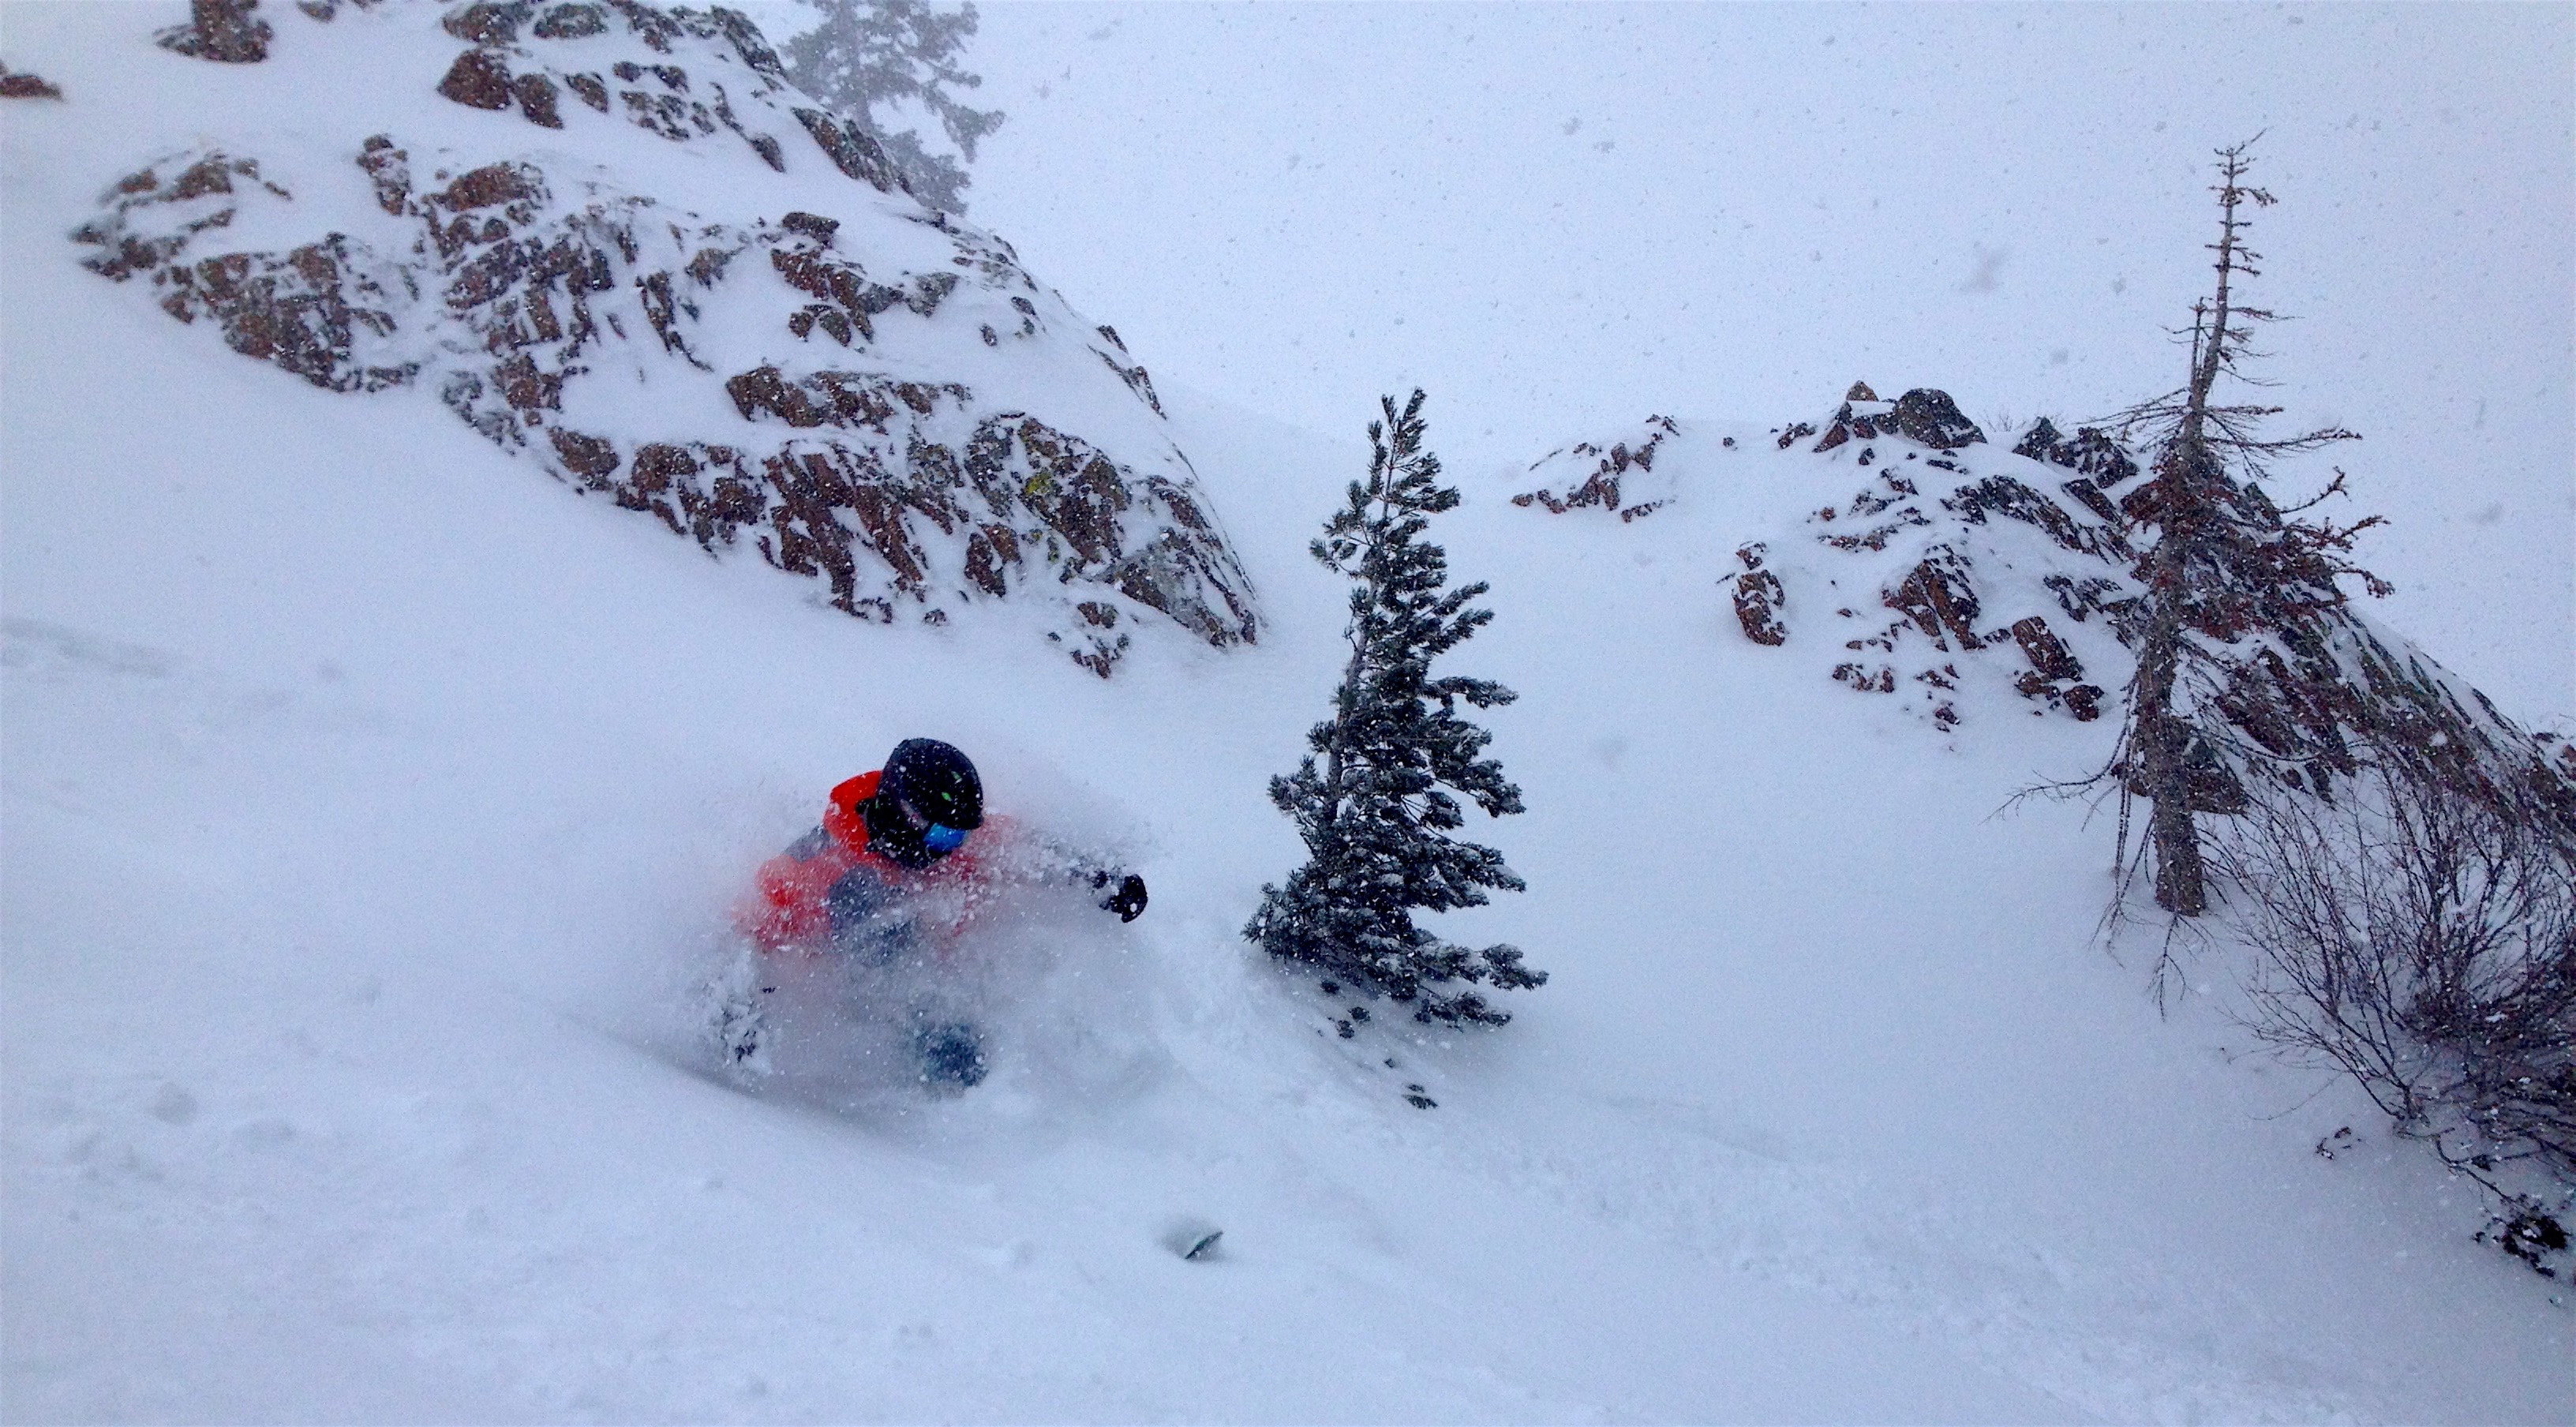 Davi getting snow to the face today. photo: snowbrains